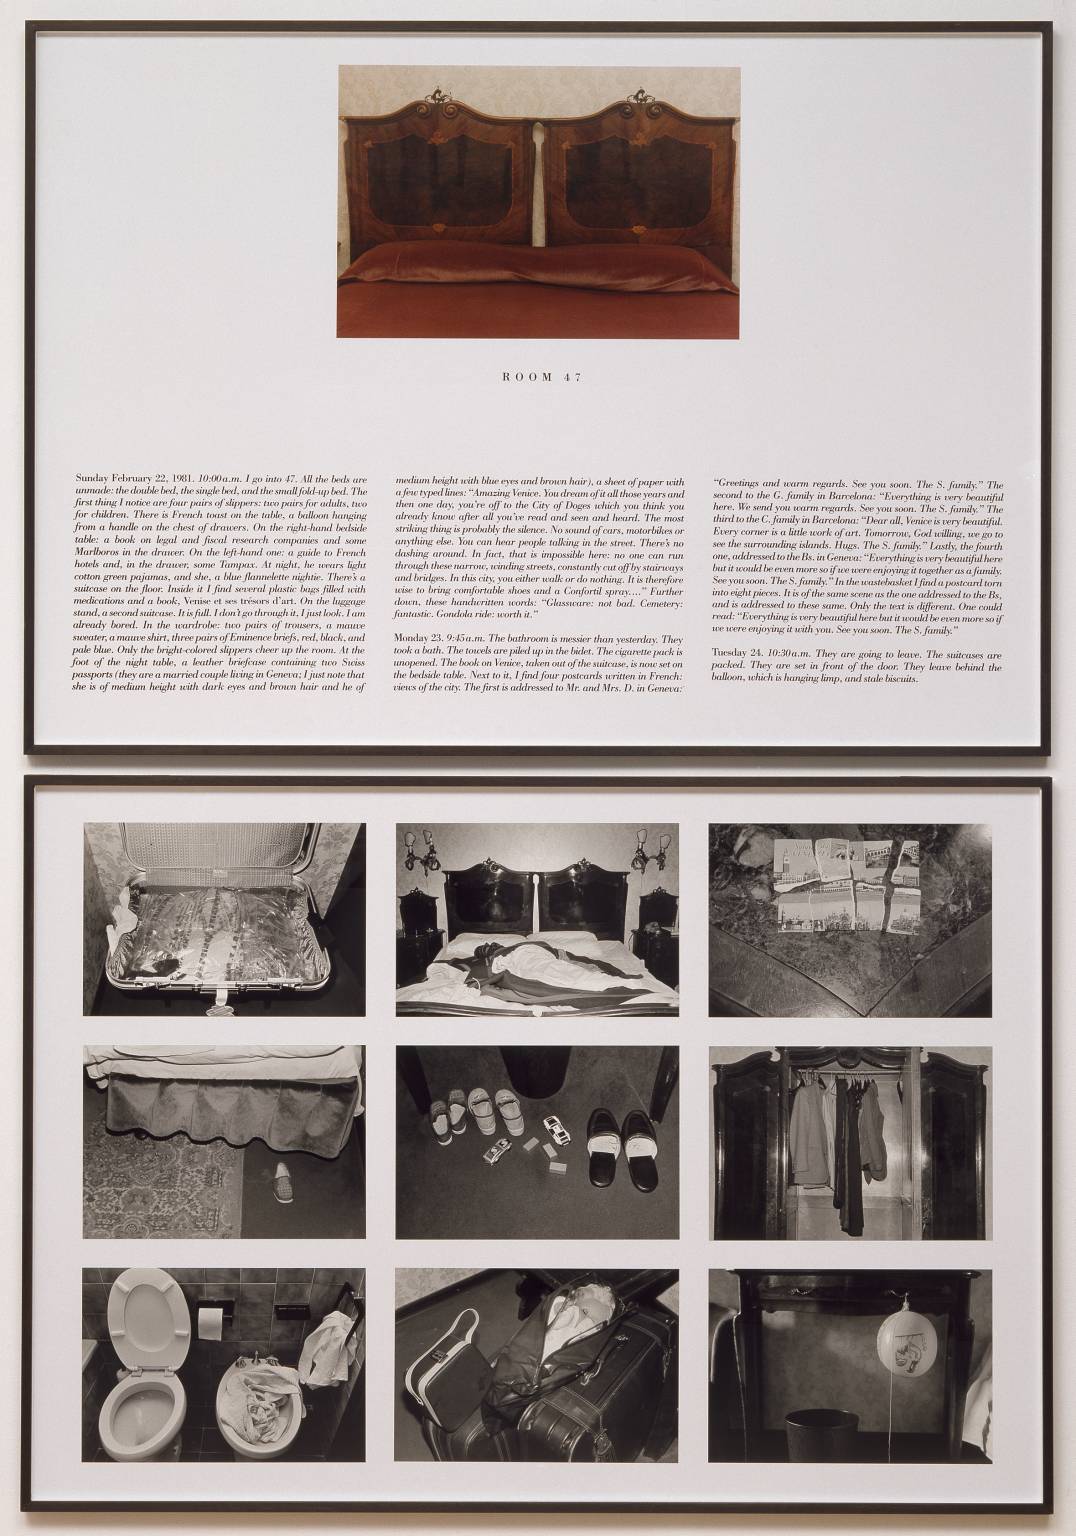 The Hotel, Room 47 1981 by Sophie Calle born 1953